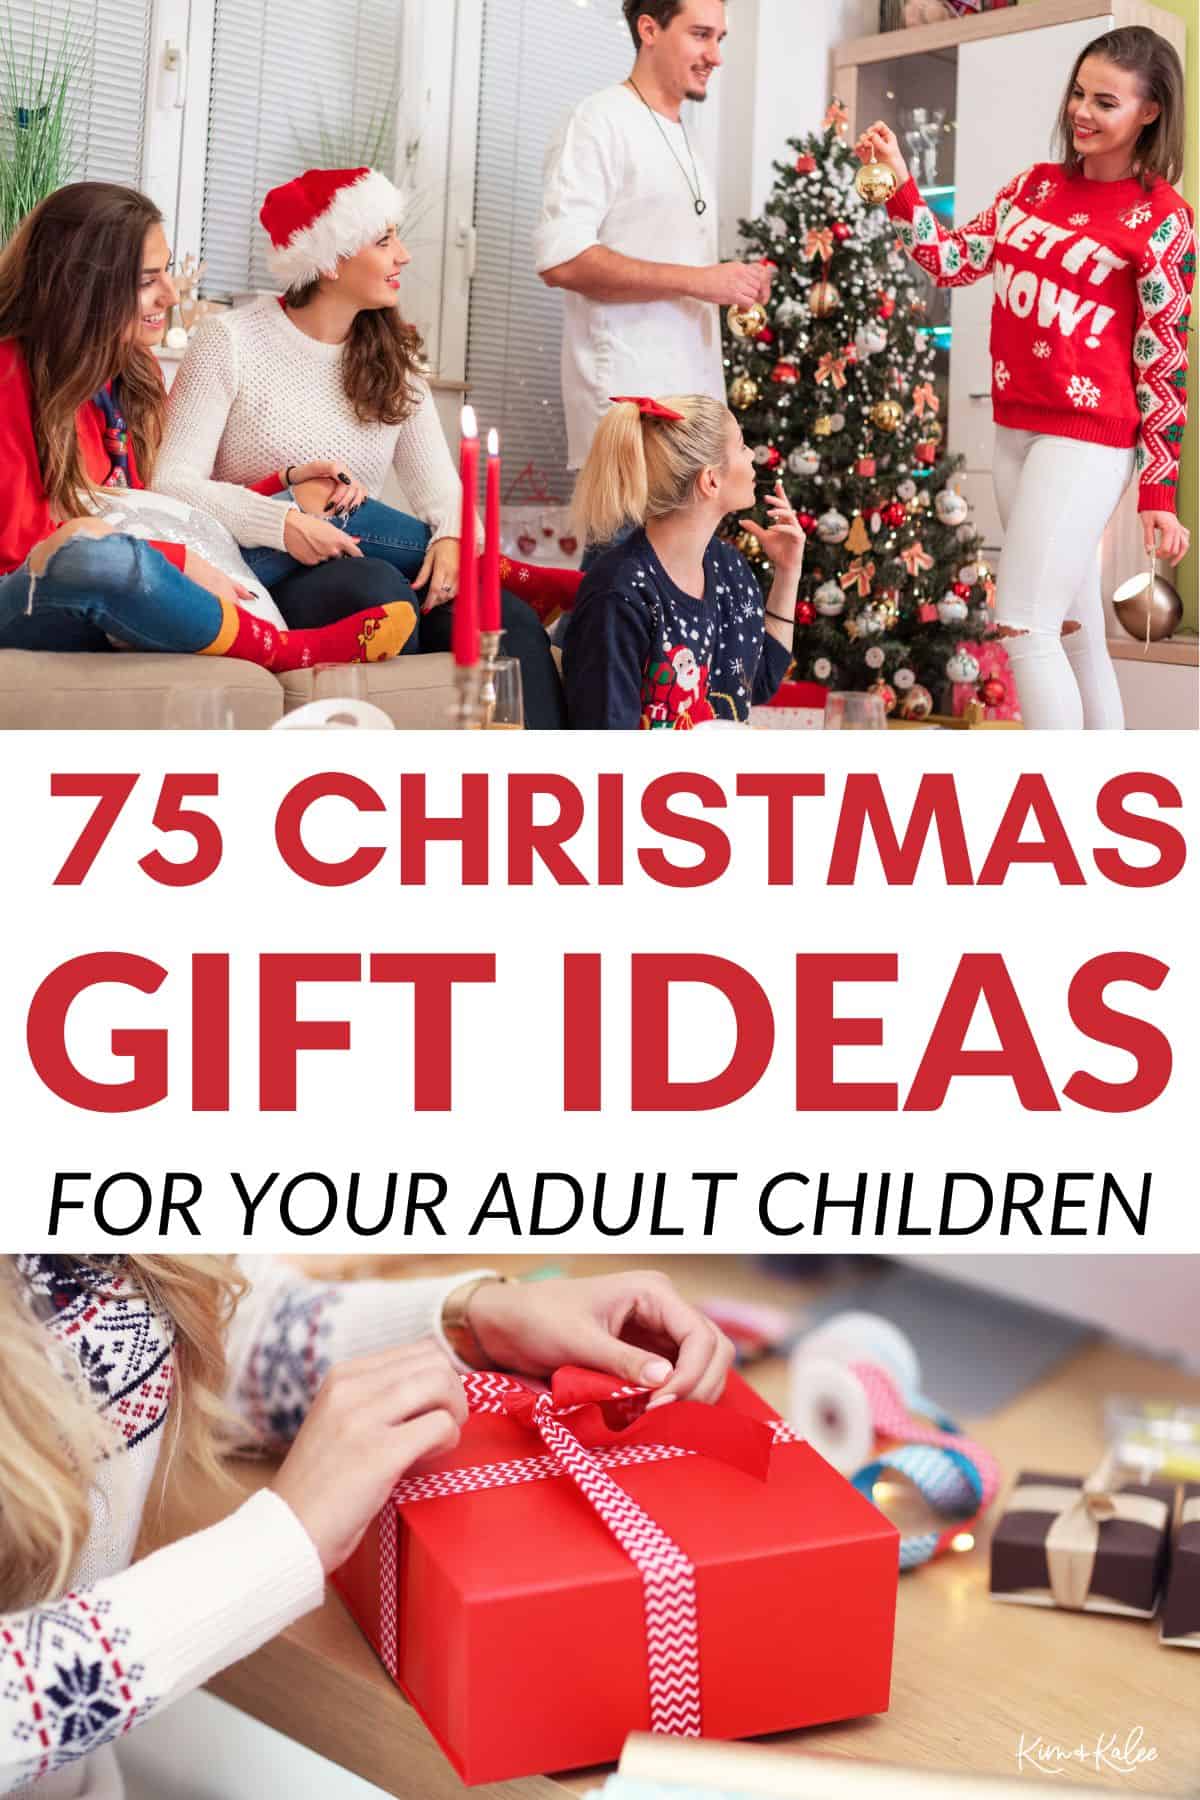 collage of a family celebrating Christmas and a close up of a woman wrapping a present - text overlay in the middle says 75 Christmas gift ideas for your adult children